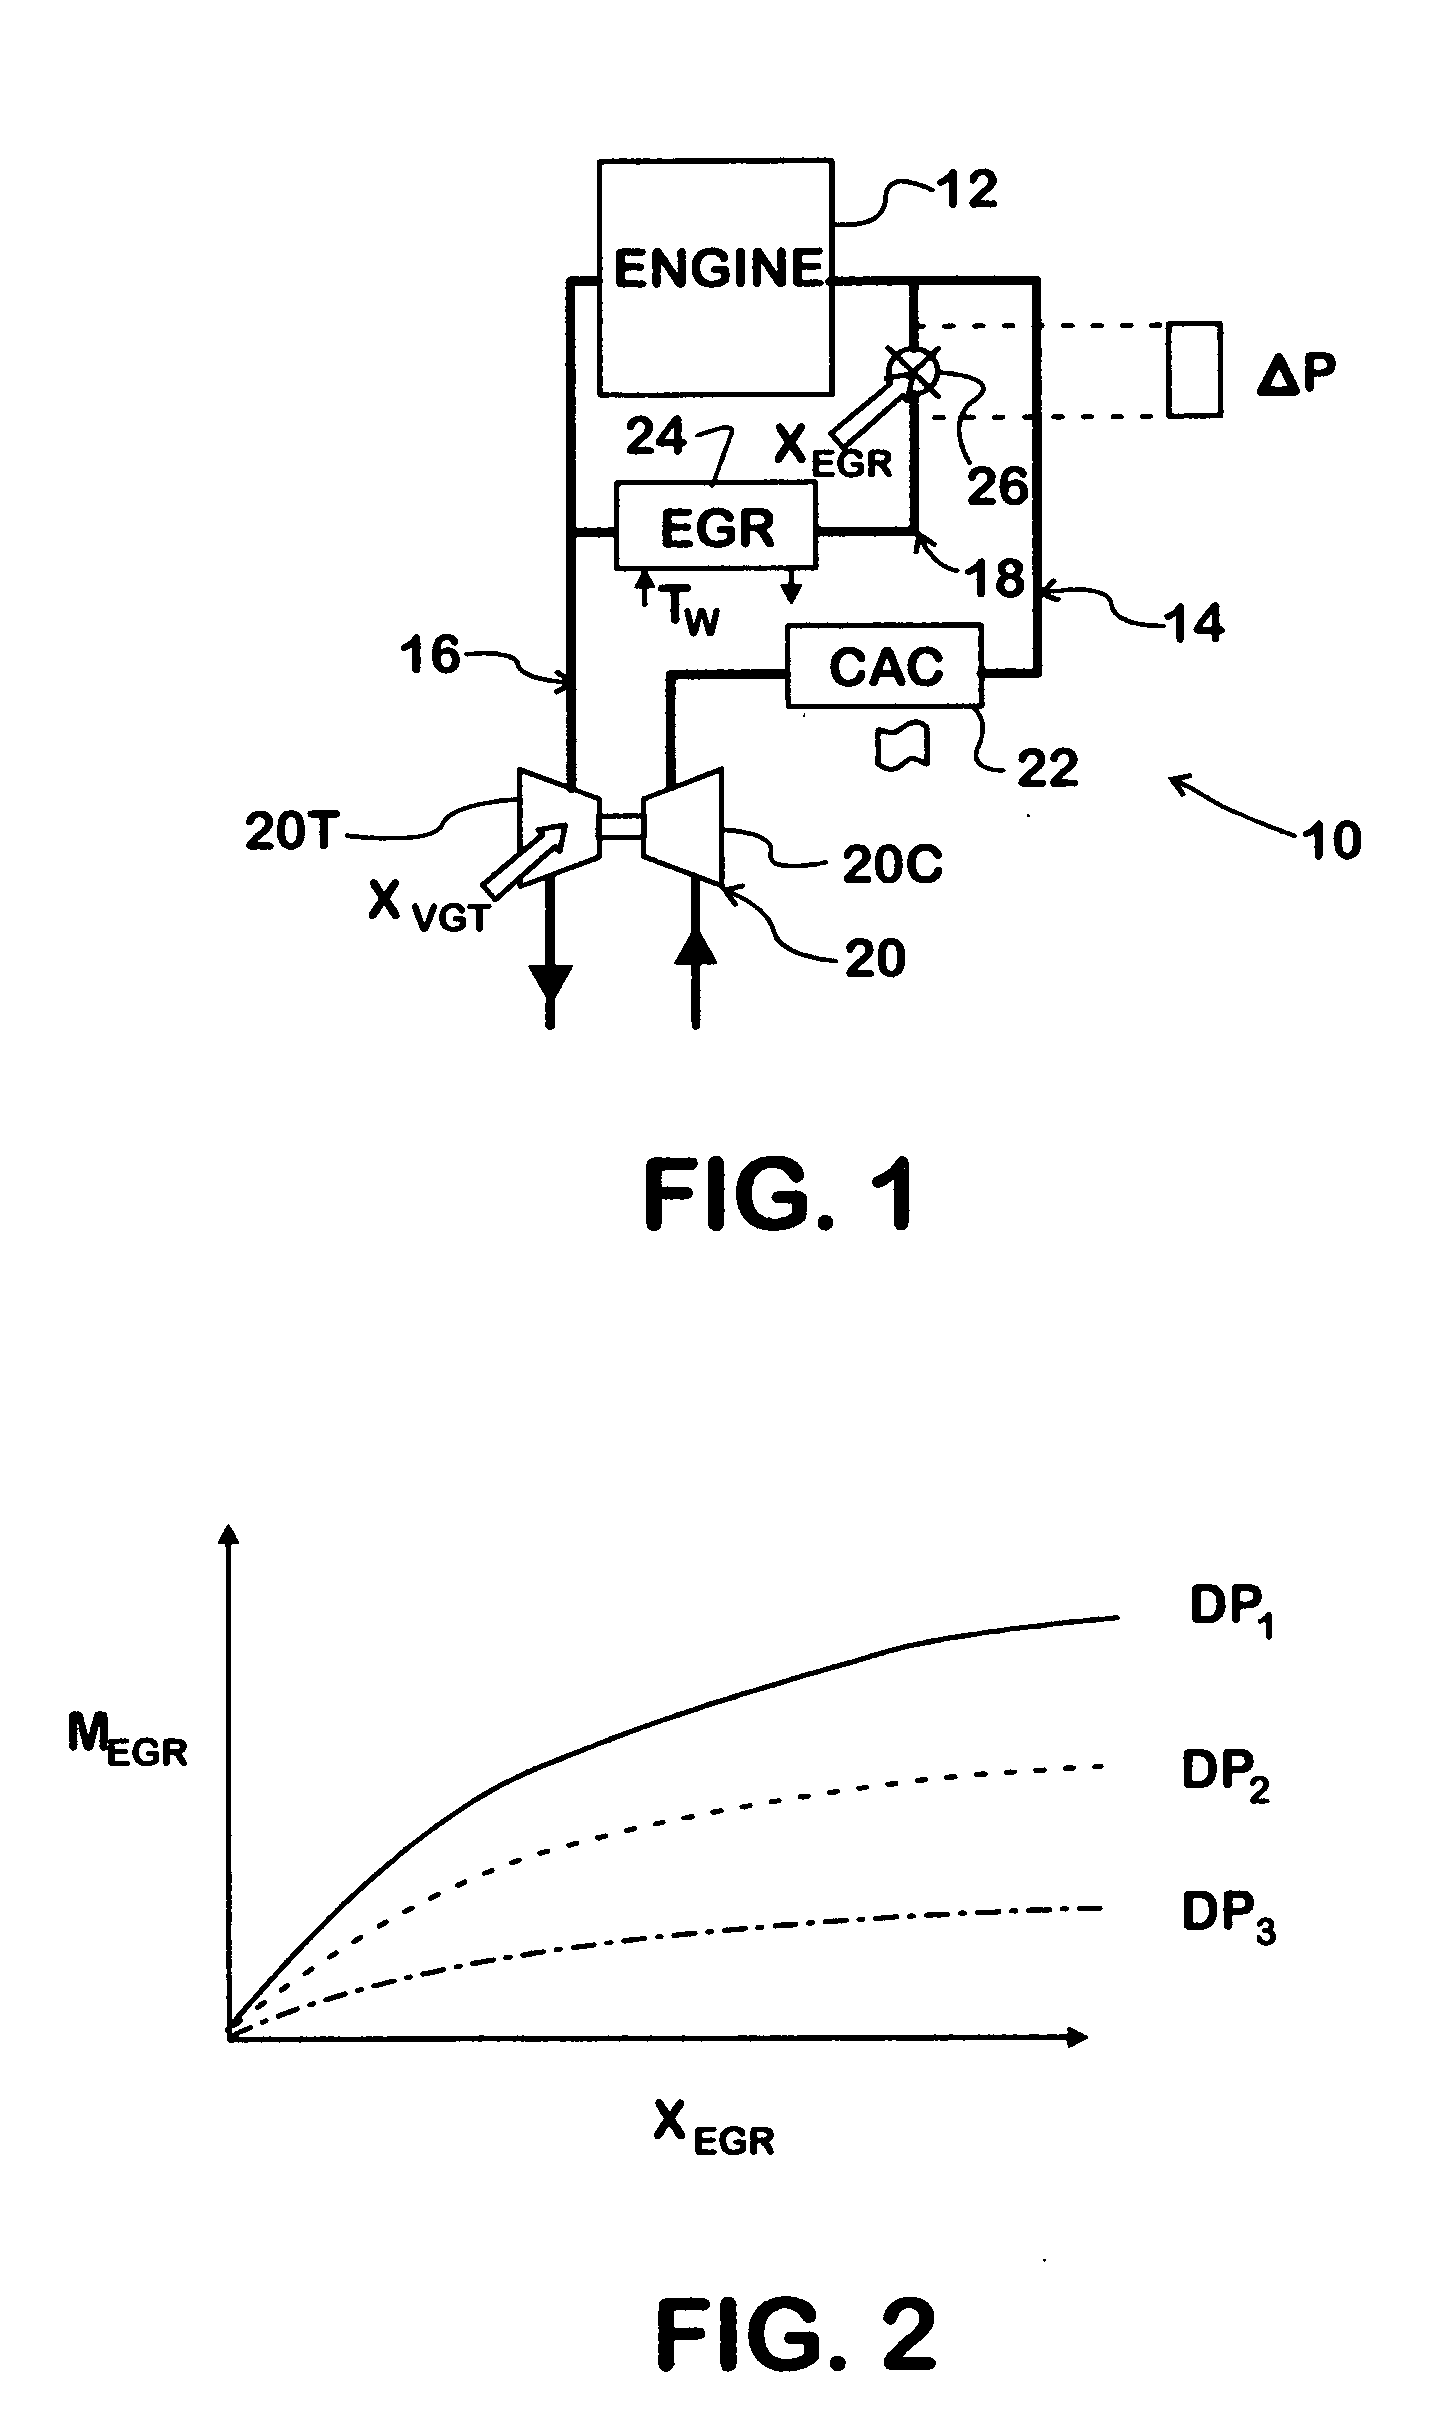 Strategy for control of recirculated exhaust gas to null turbocharger boost error